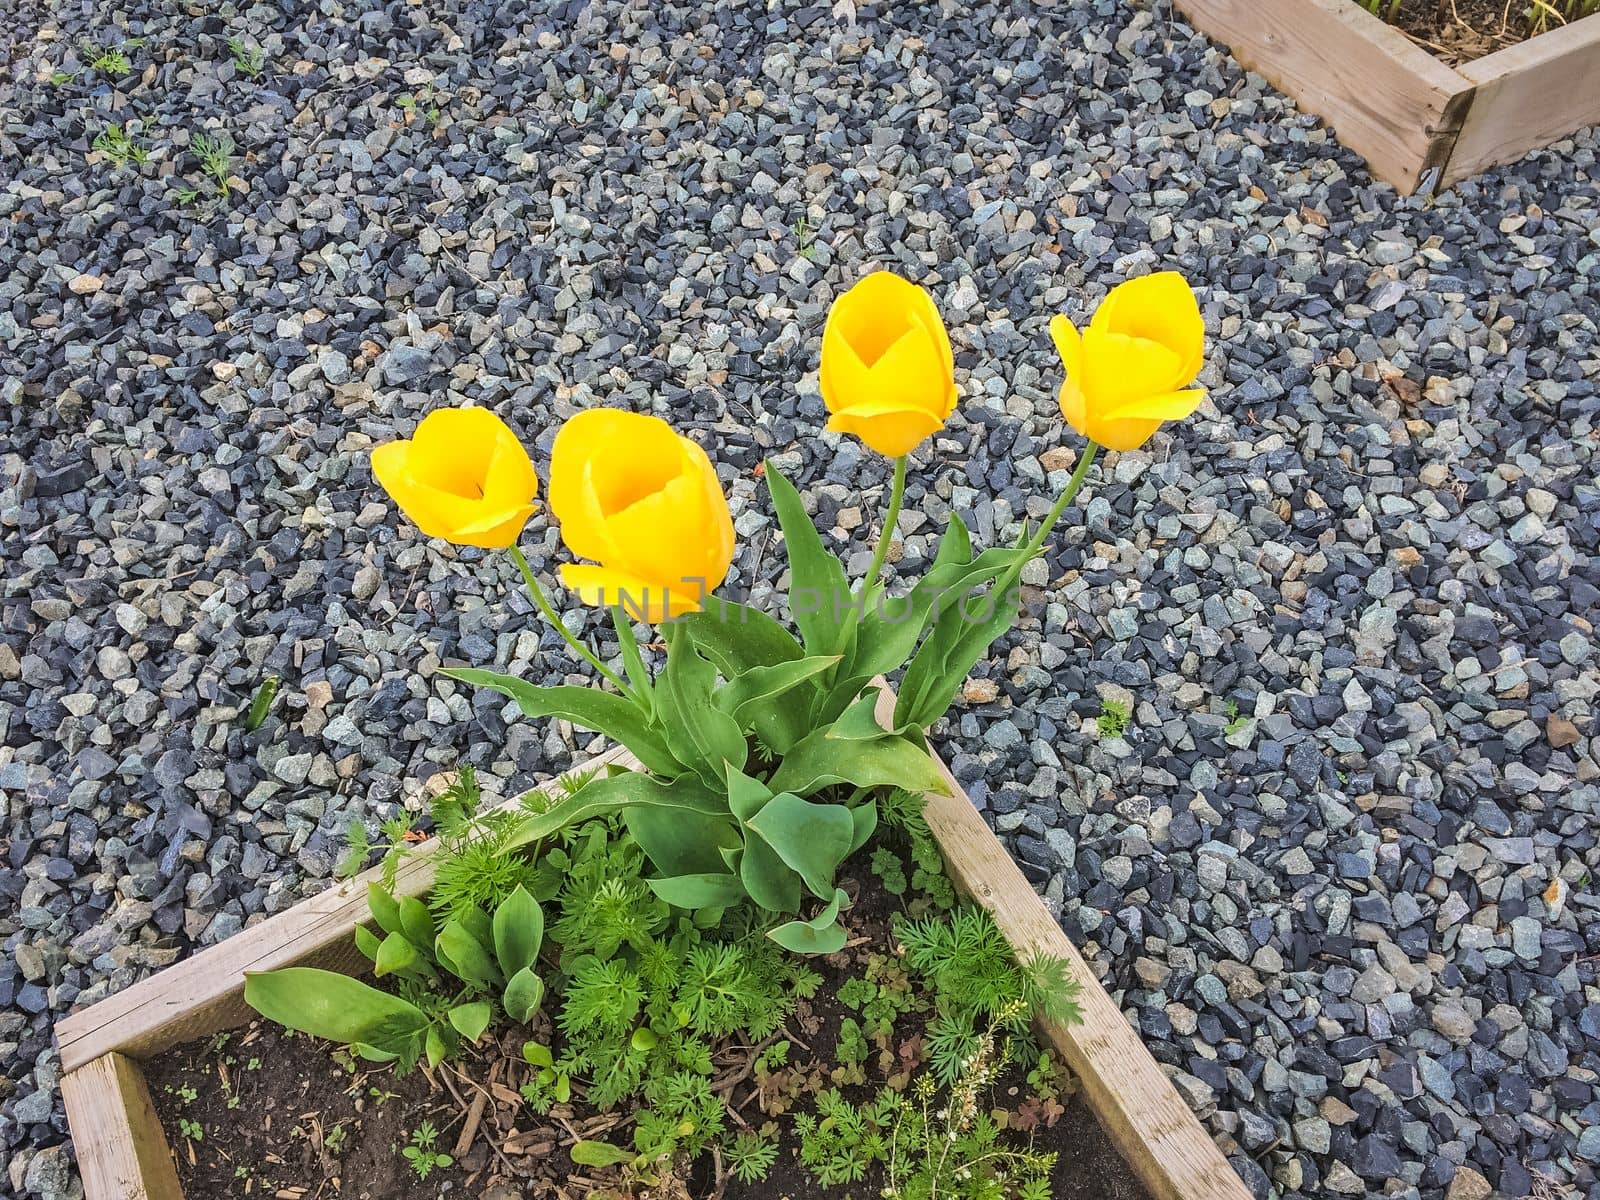 Blossoming yellow tulips growing in the corner of the flower bed.